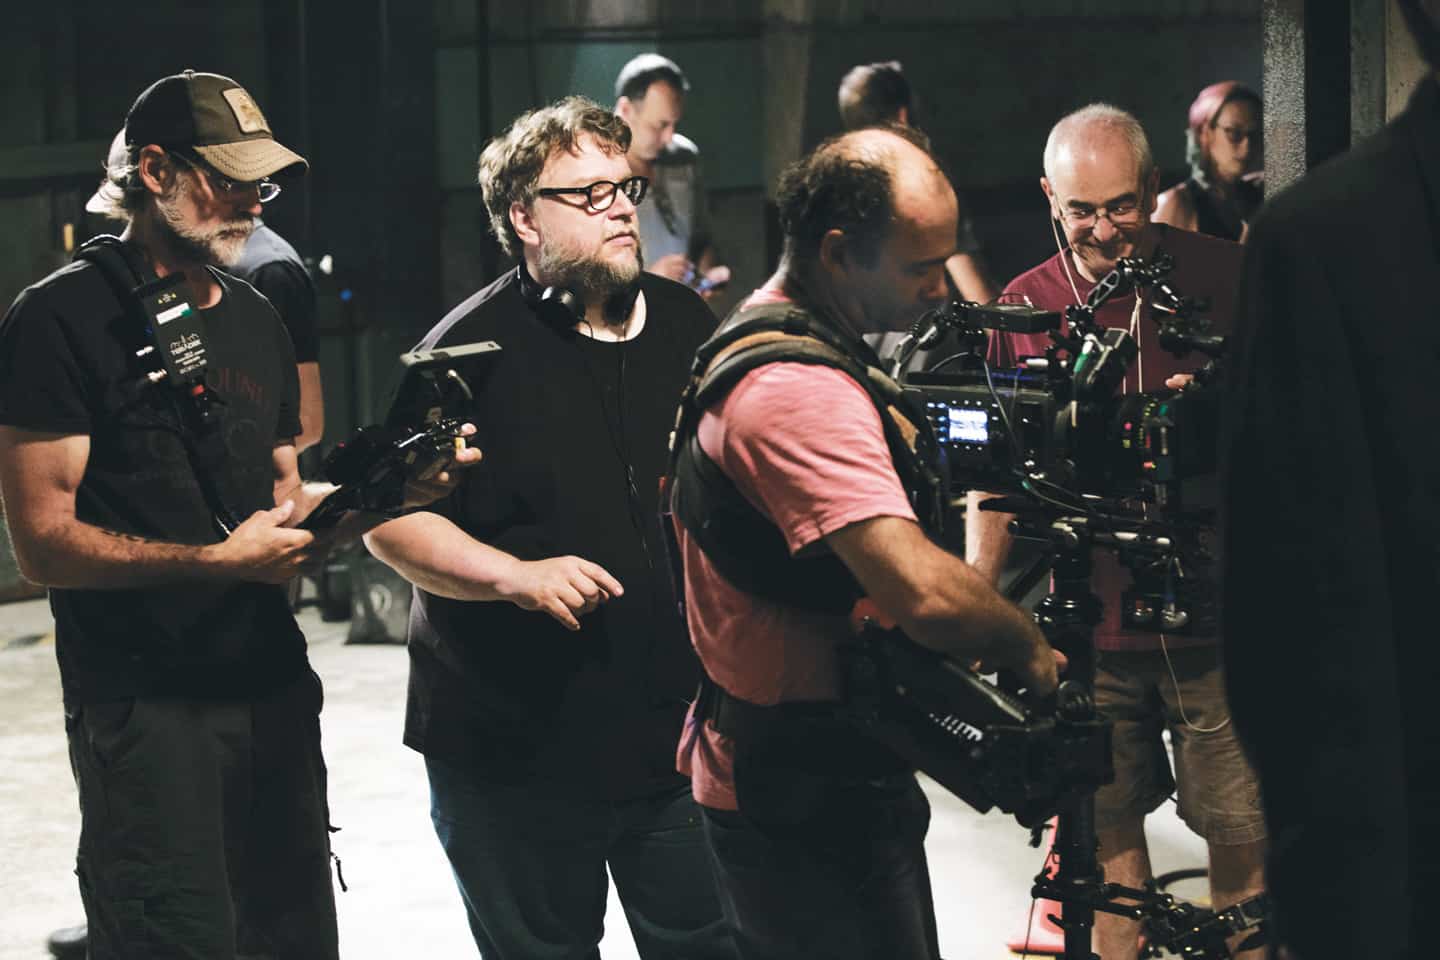 Photograph of Guillermo del Toro directing on a film set. There are 7 people visible, including a camera operator.